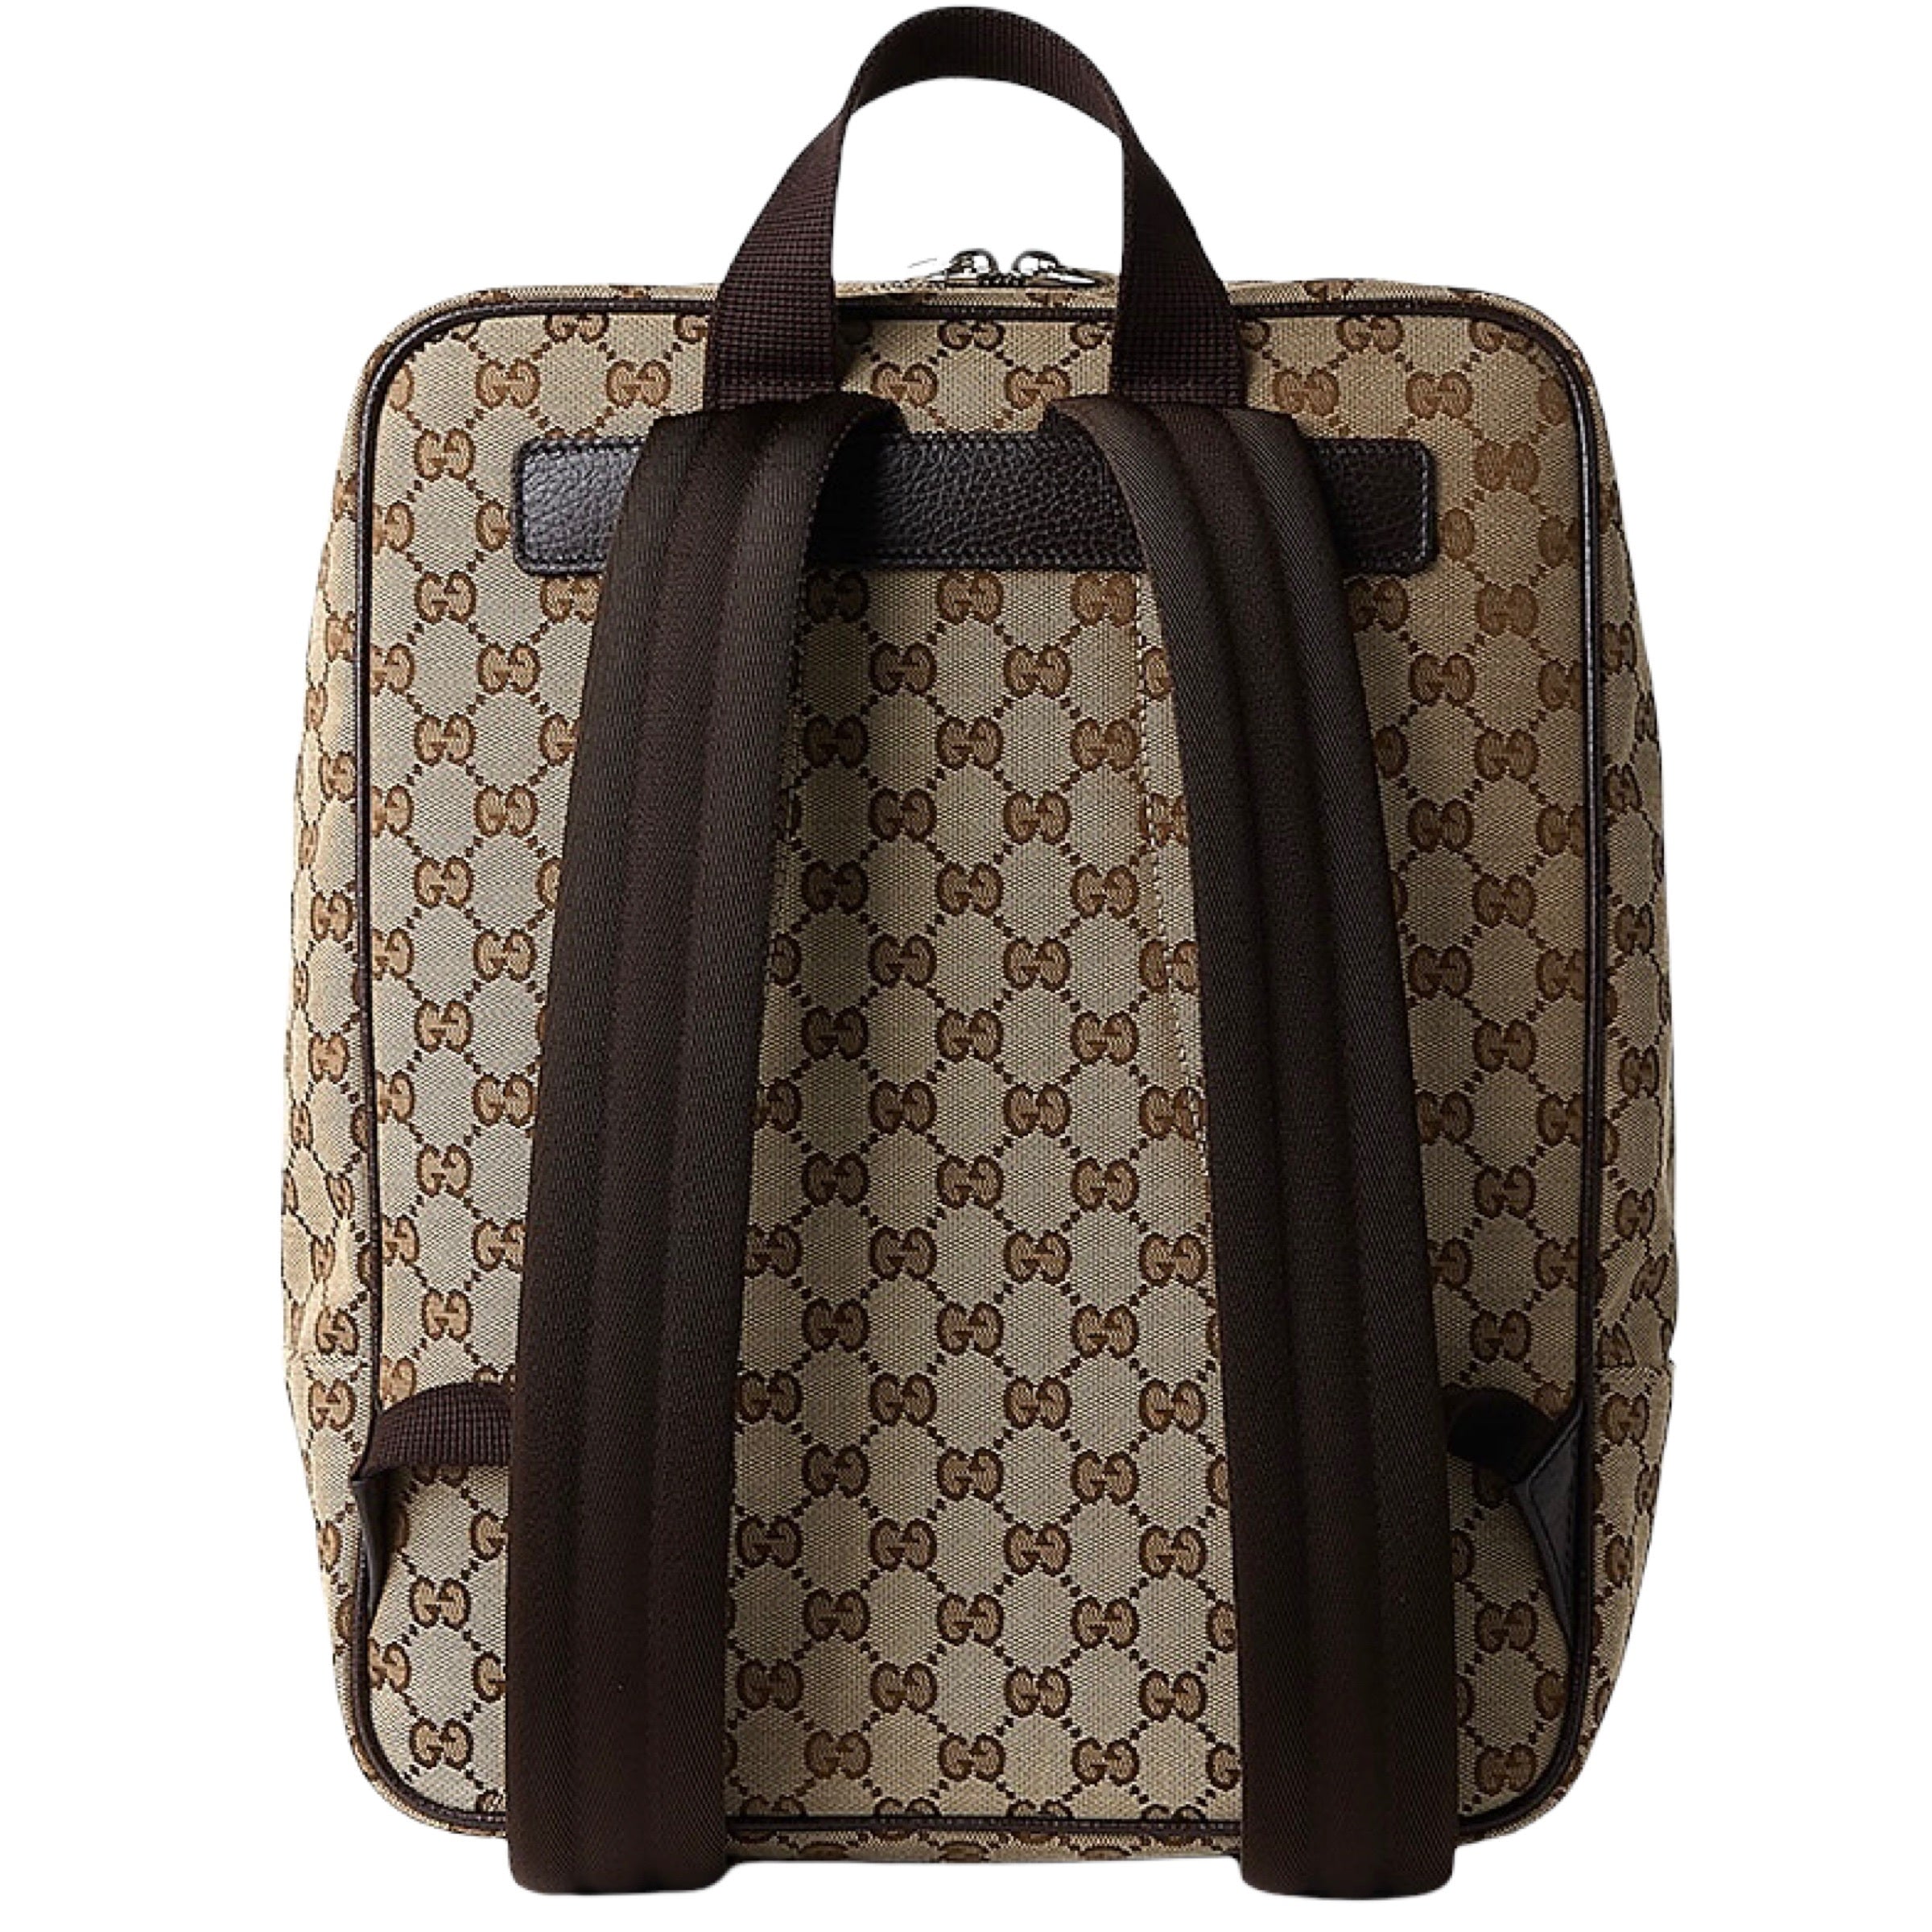 Gucci Original GG Canvas Large Backpack